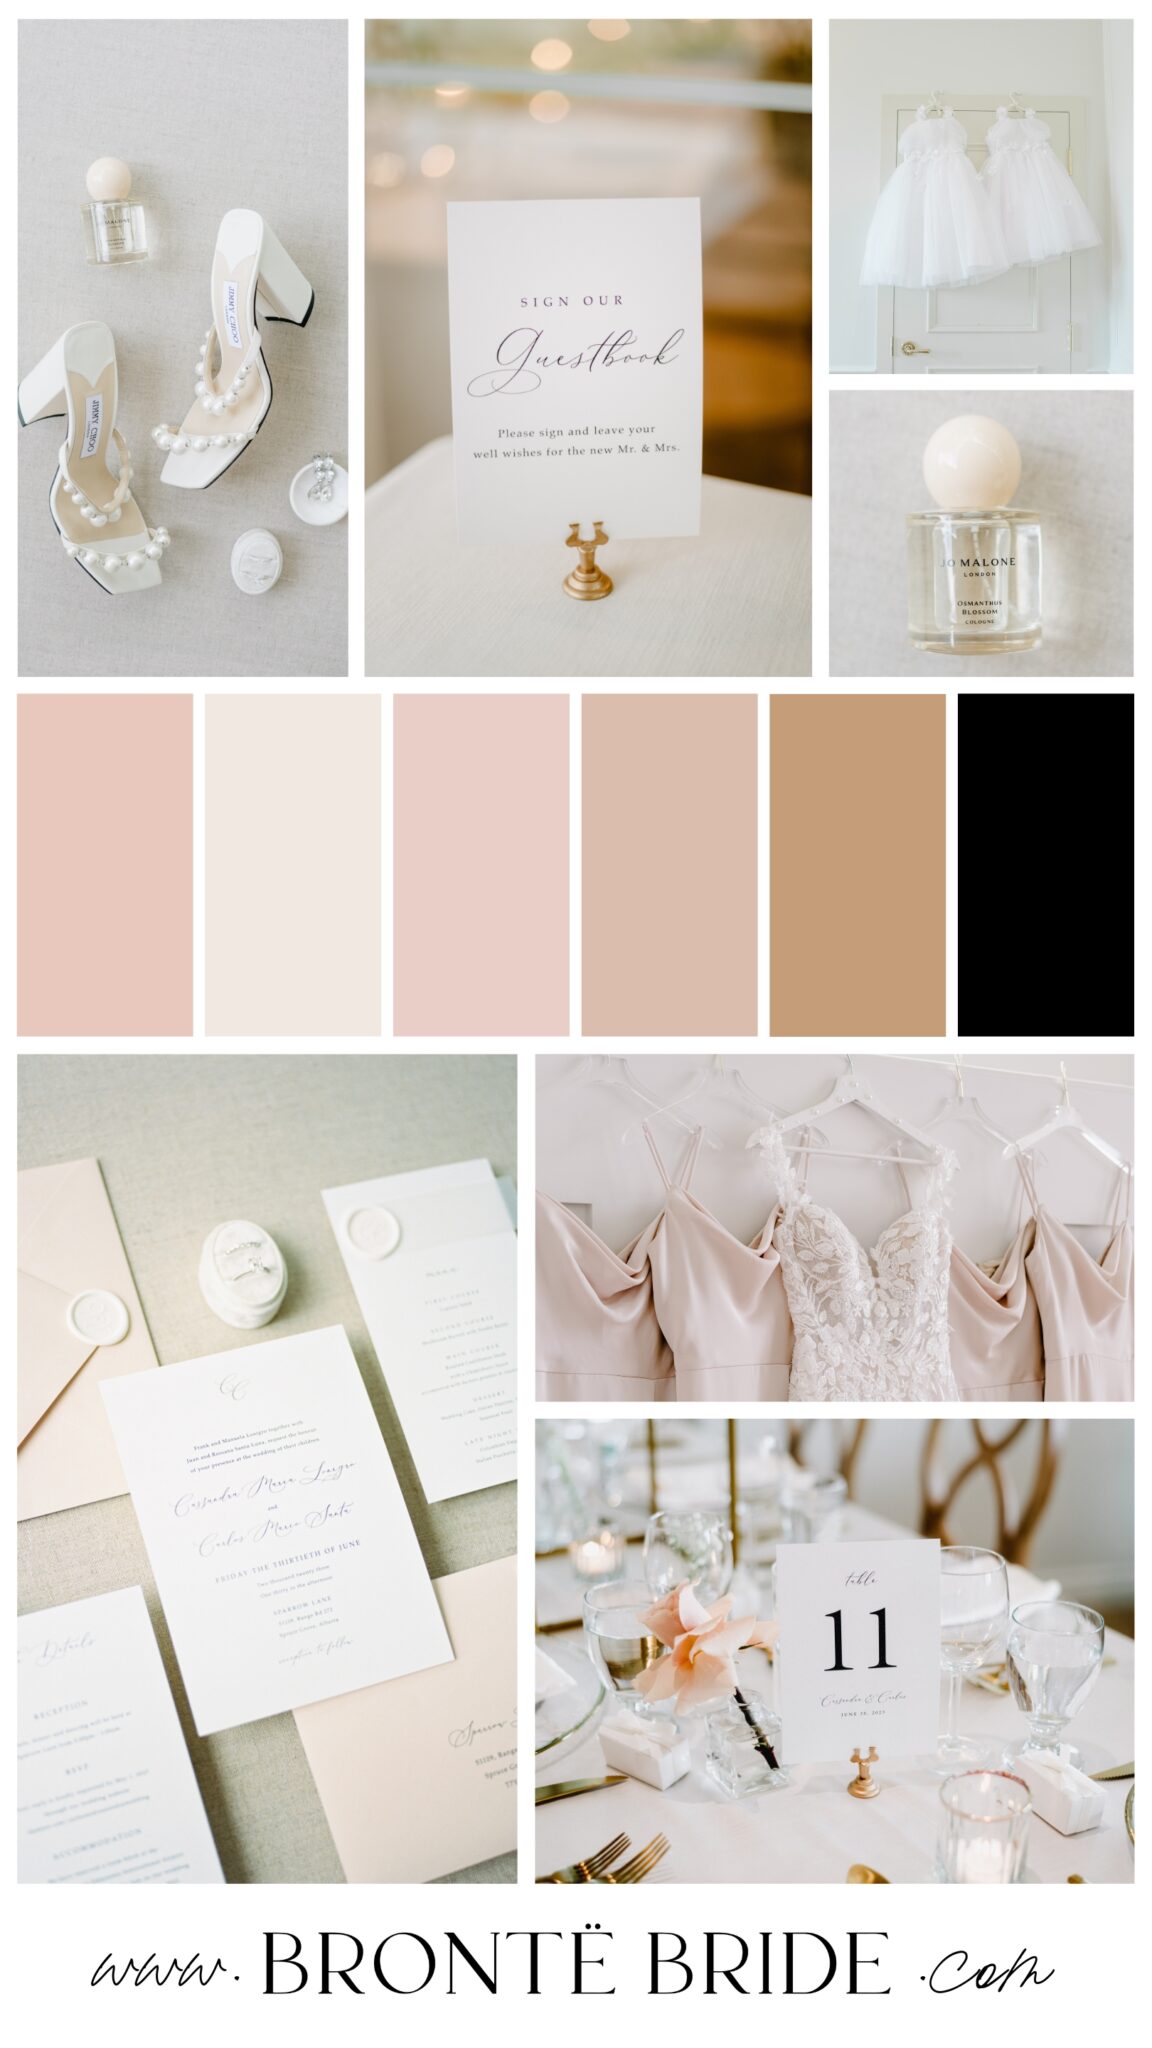 Real wedding colour palette inspiration, blush pink and taupe - wedding colour schemes and moodboards from Bronte Bride